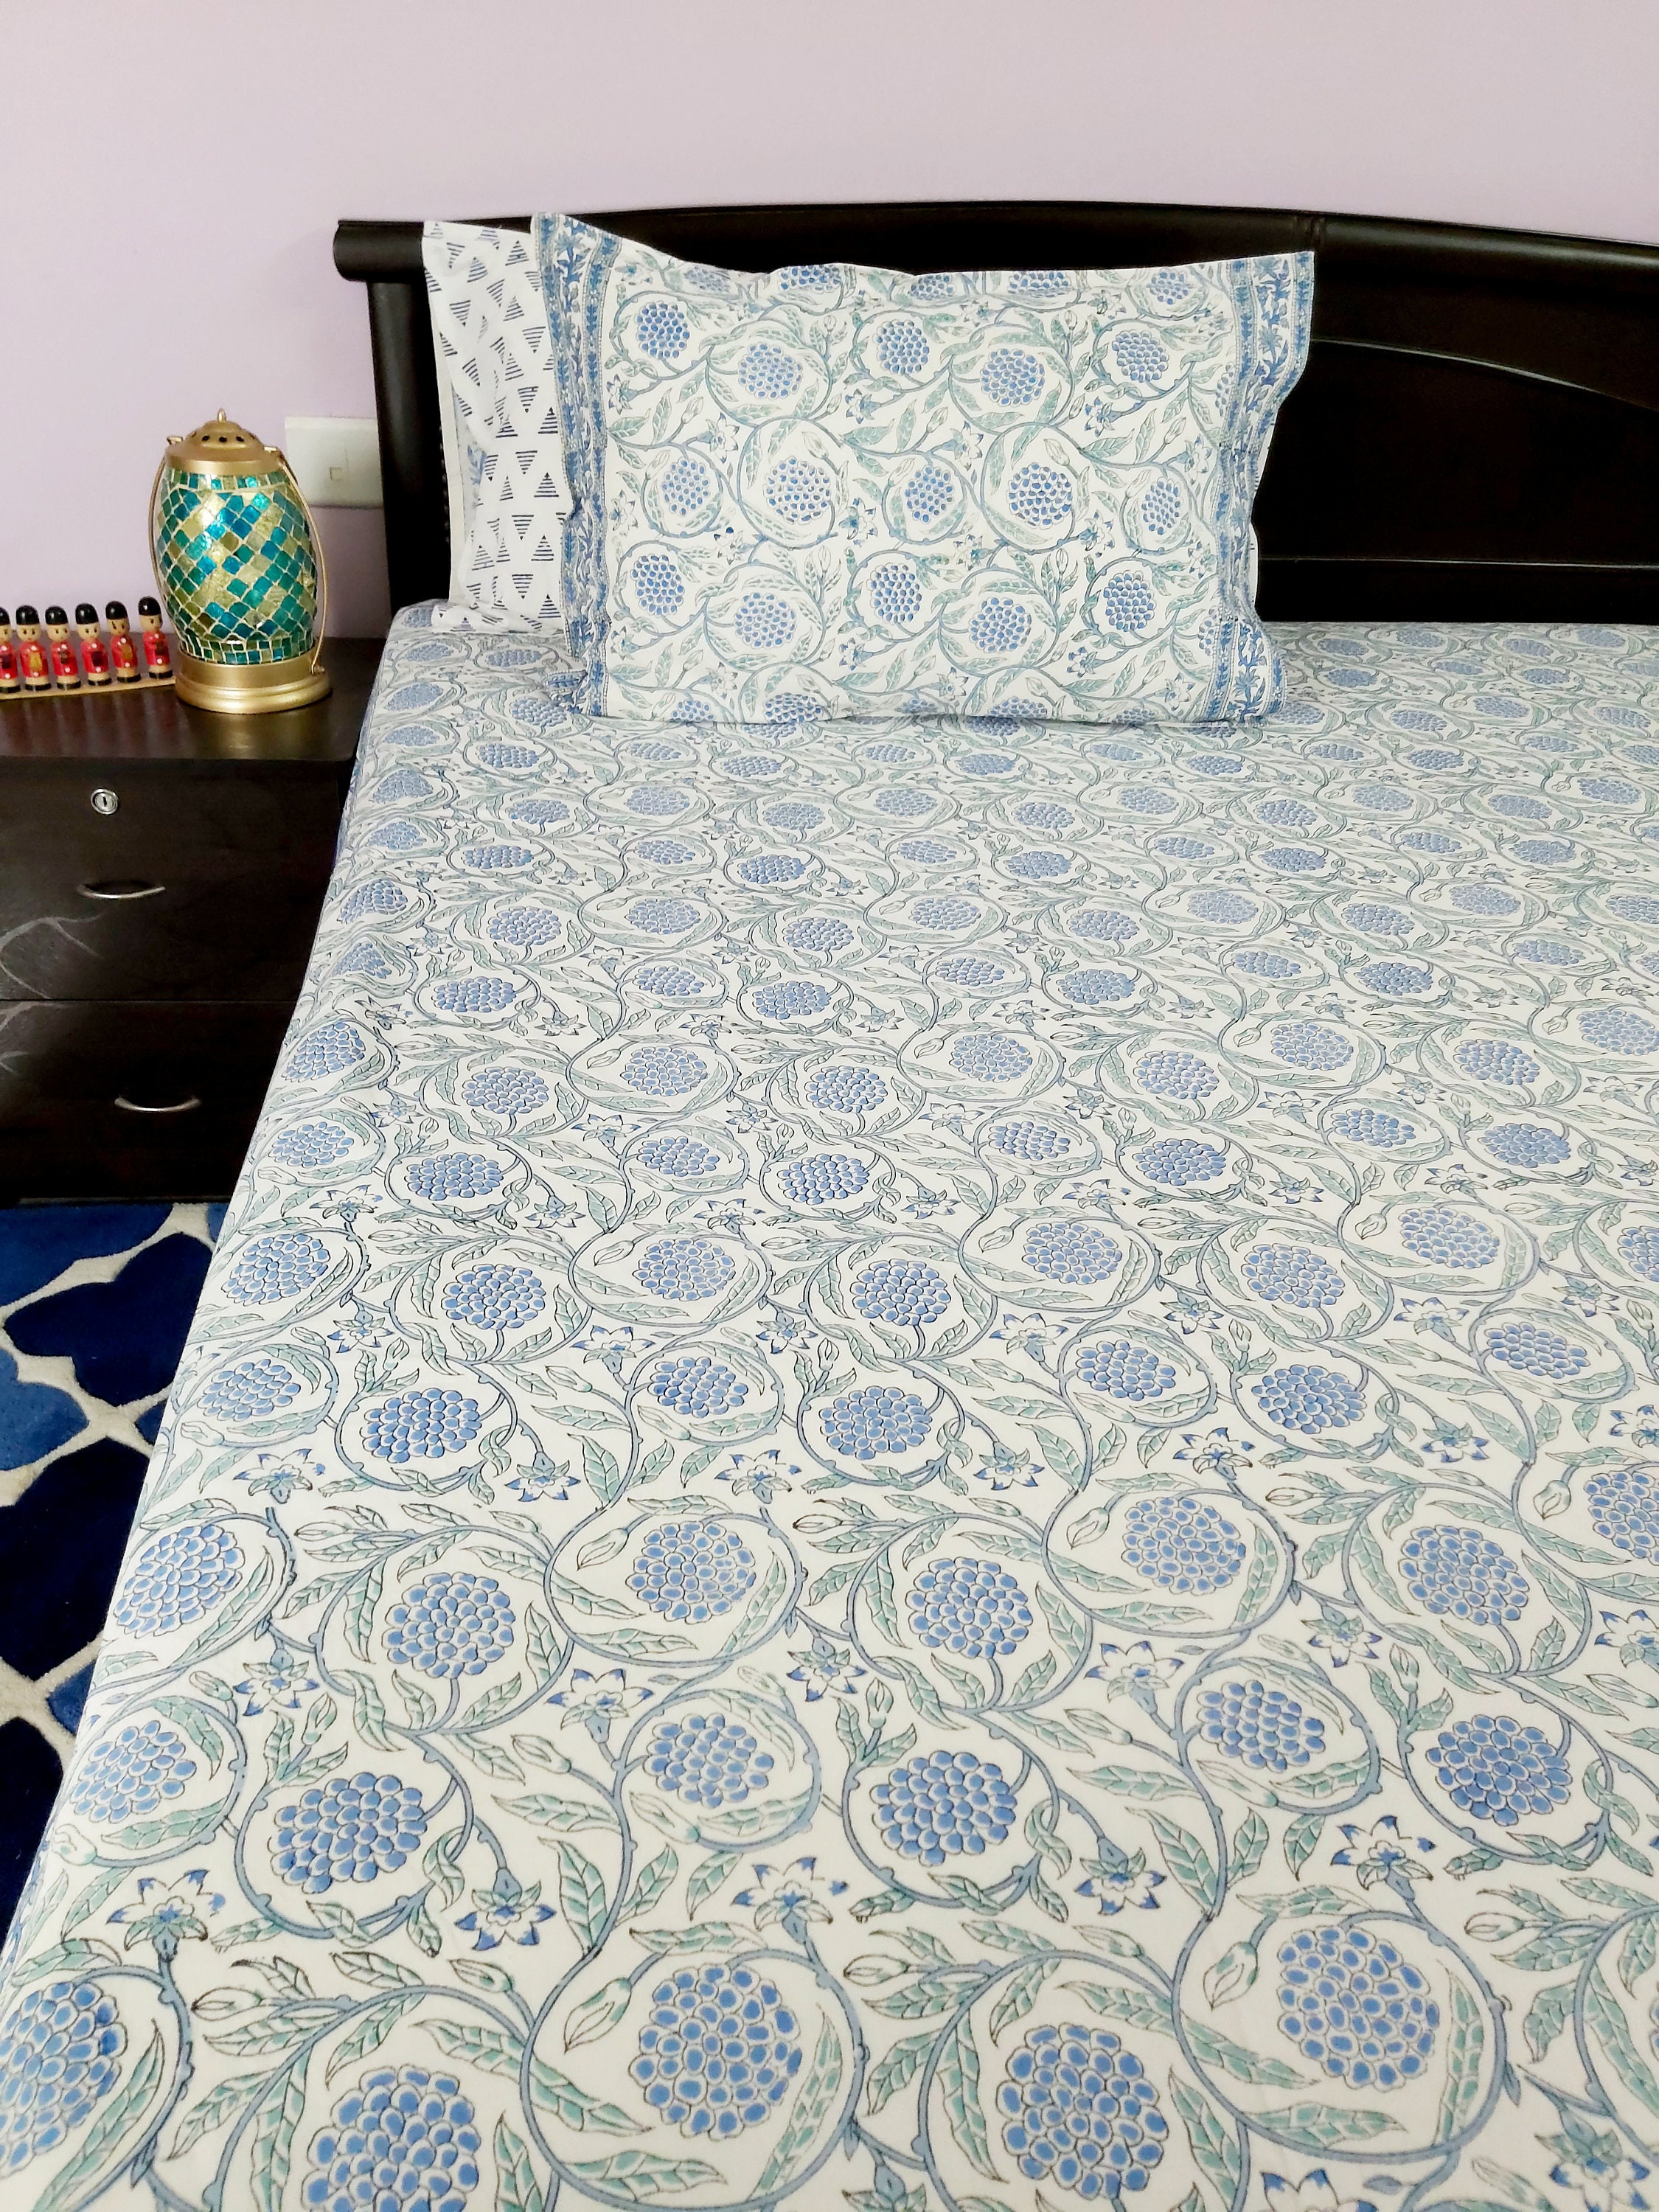 Cotton Based Quilt Jaipuri Quilt Indian Handmade Quilt With Gray And Navy Blue Color Hand Block Print,Bedspreads Beautiful Animal Design